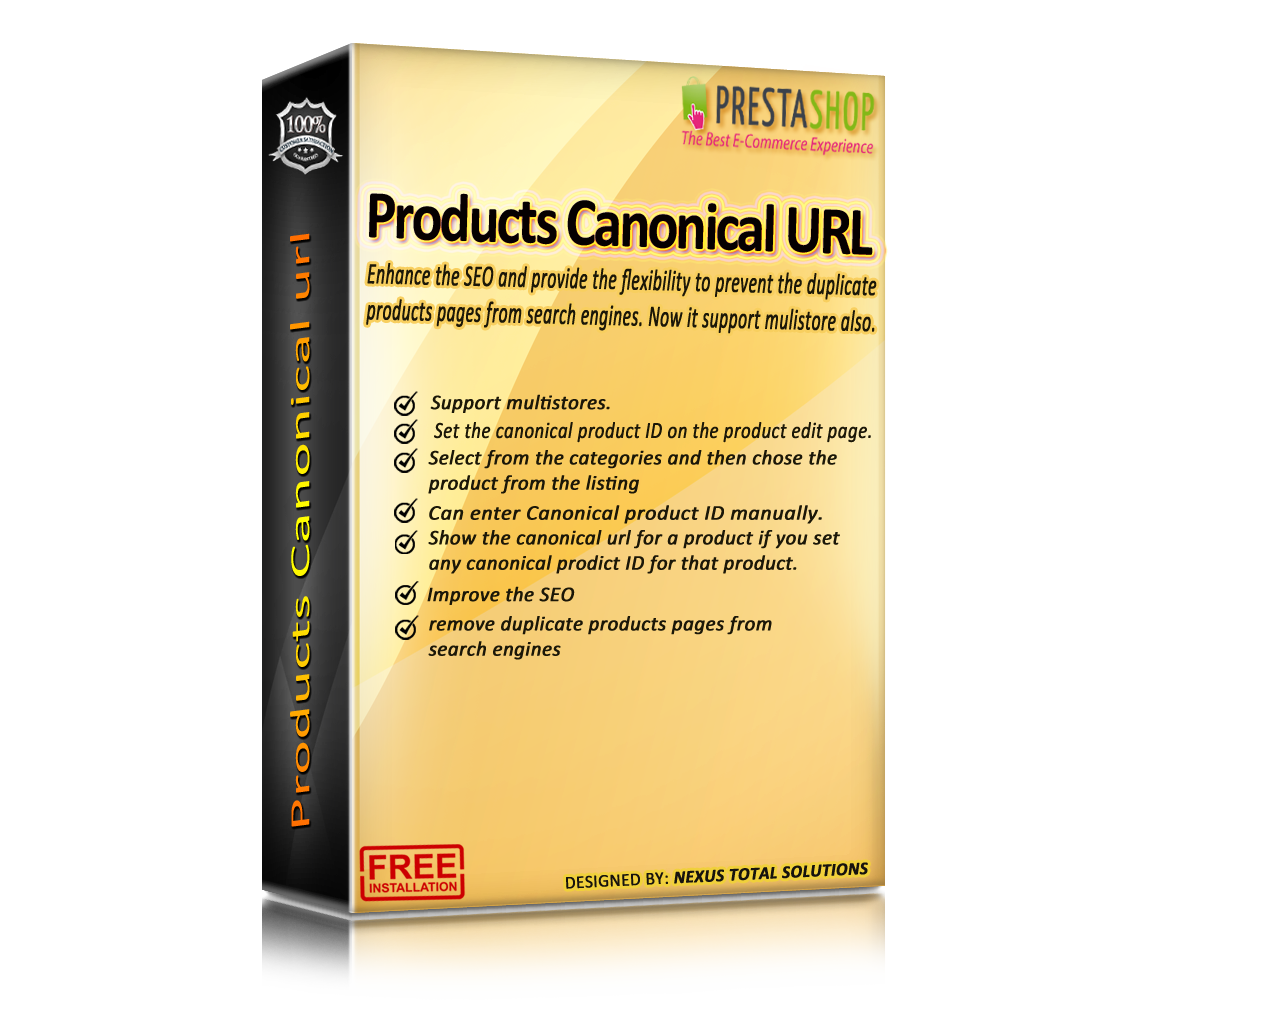 Products Canonical URL